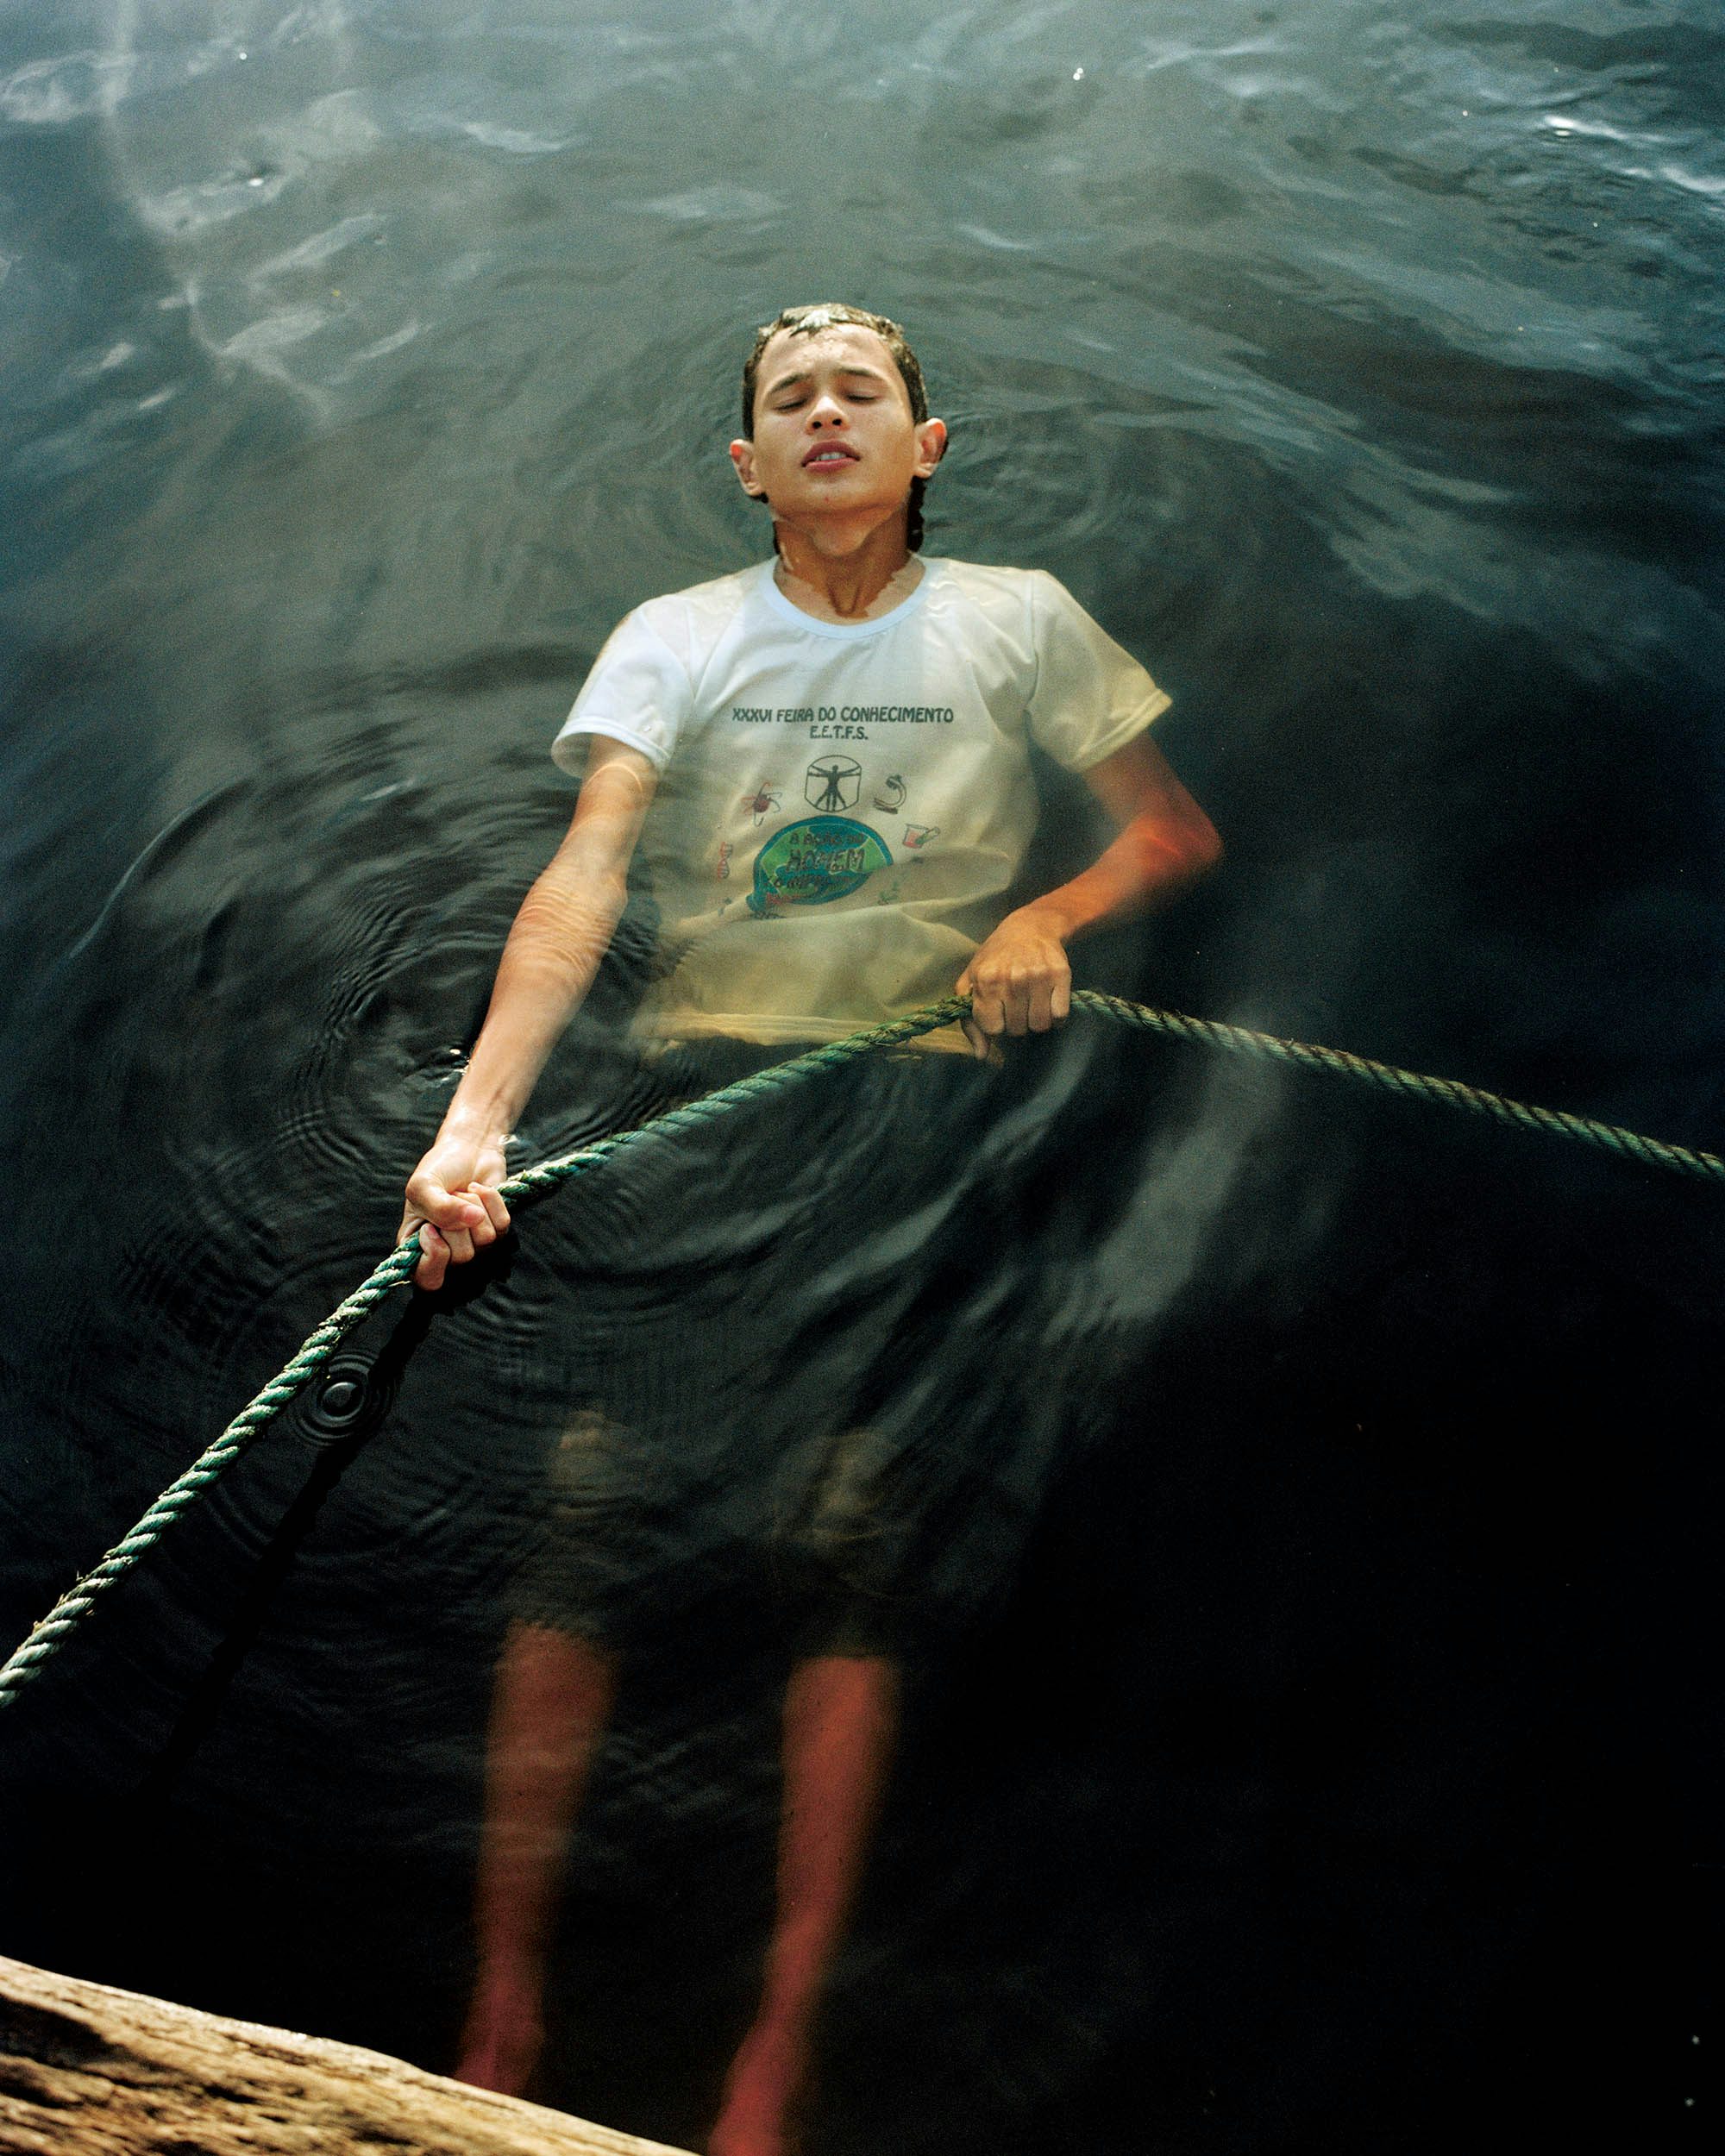 Photograph of a person floating in water holding a rope in Like a River by Daniel Jack Lyons